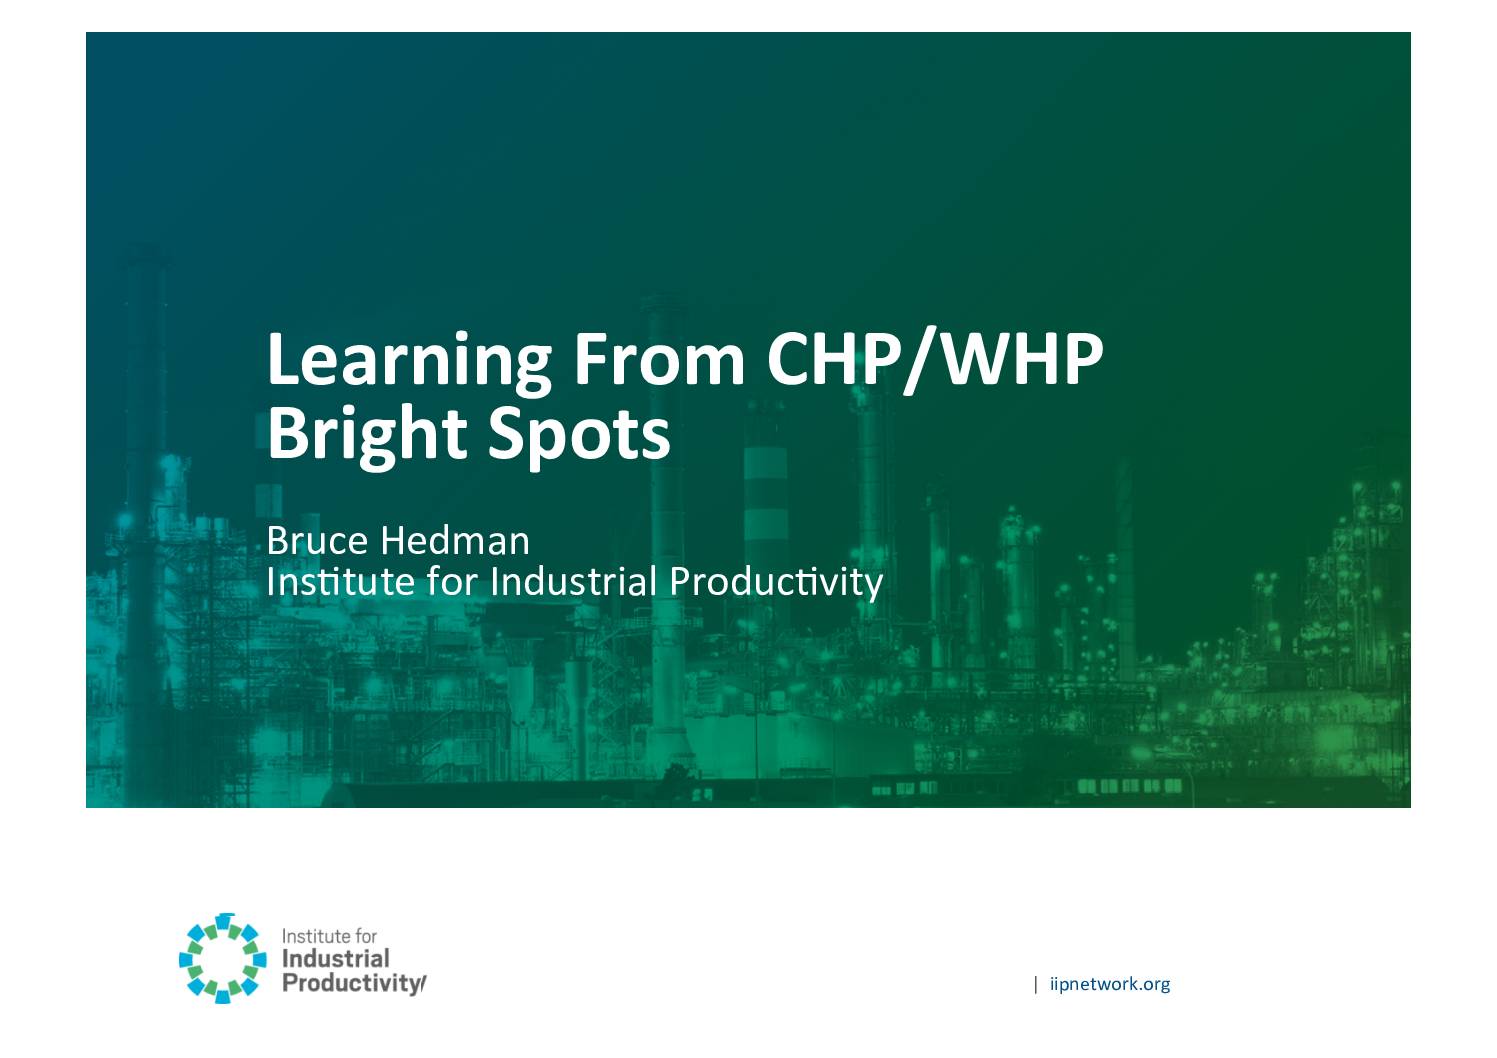 Learning From CHP/WHP Bright Spots